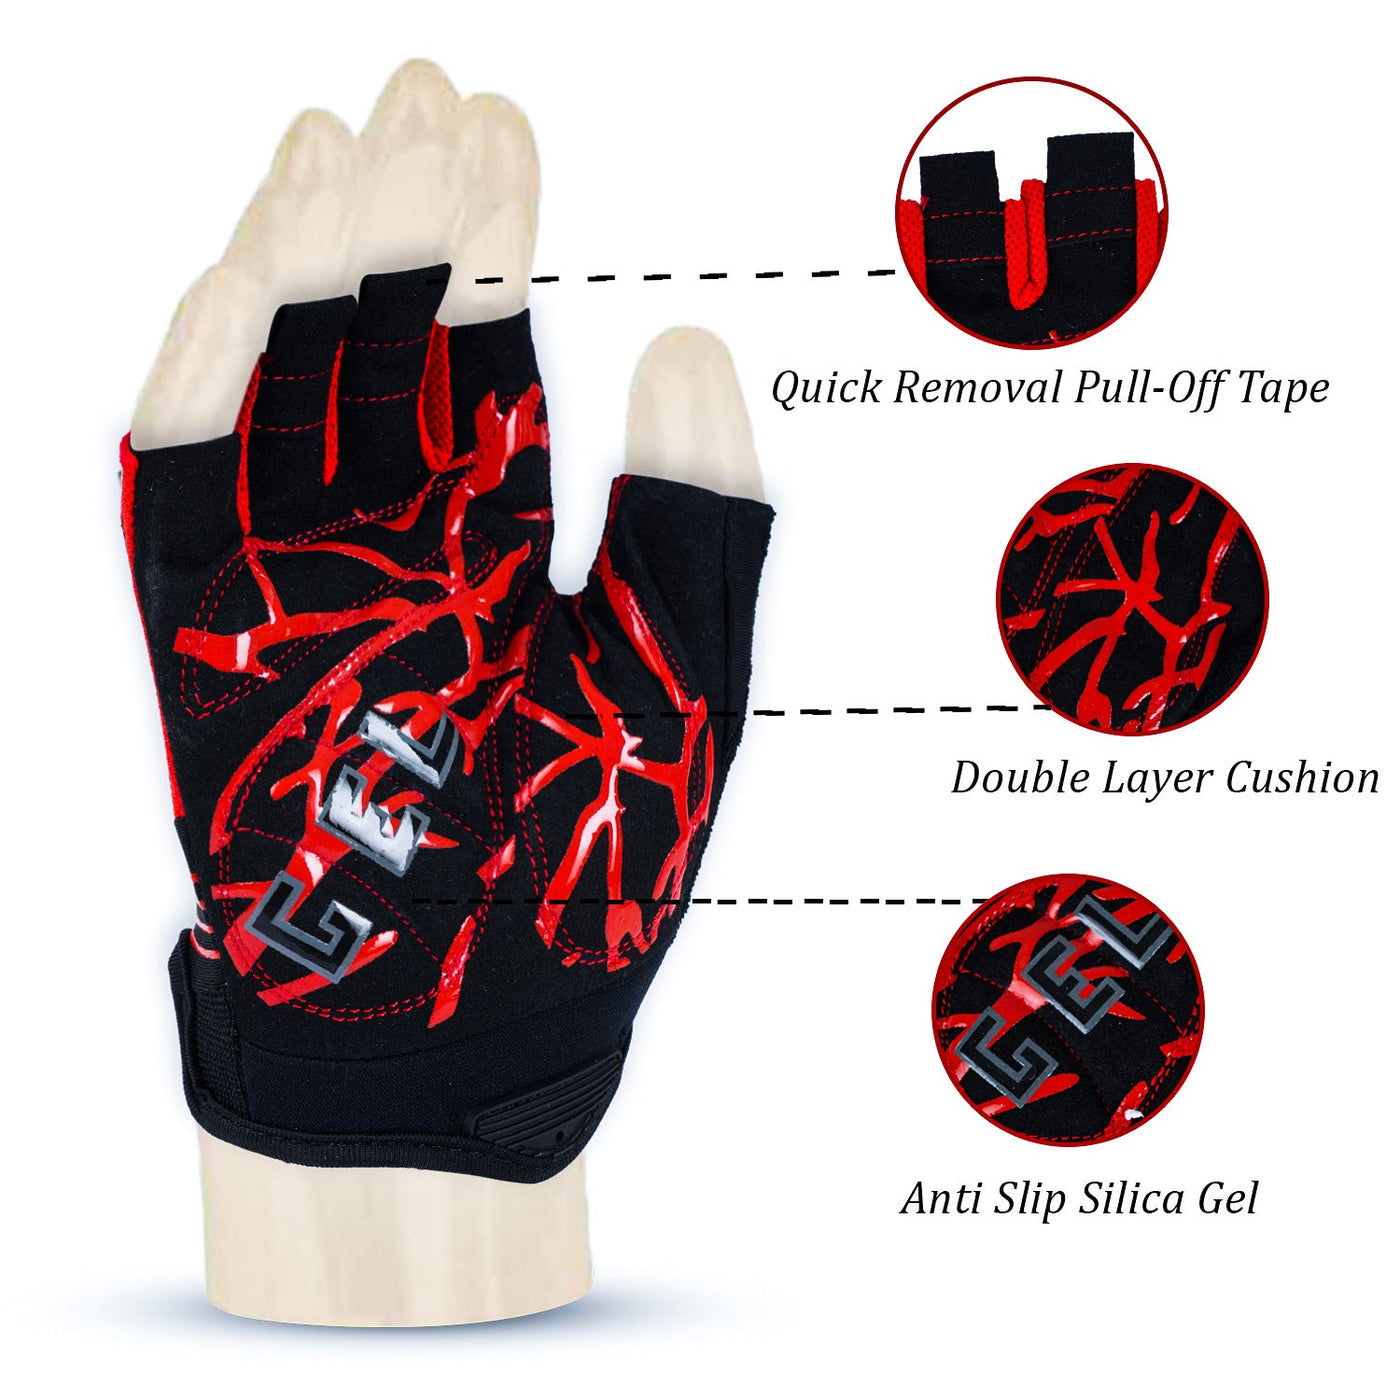 ZAKPRO Gel Series Anti-Slip Professional Half Finger Cycling Gloves - Red - Cyclop.in